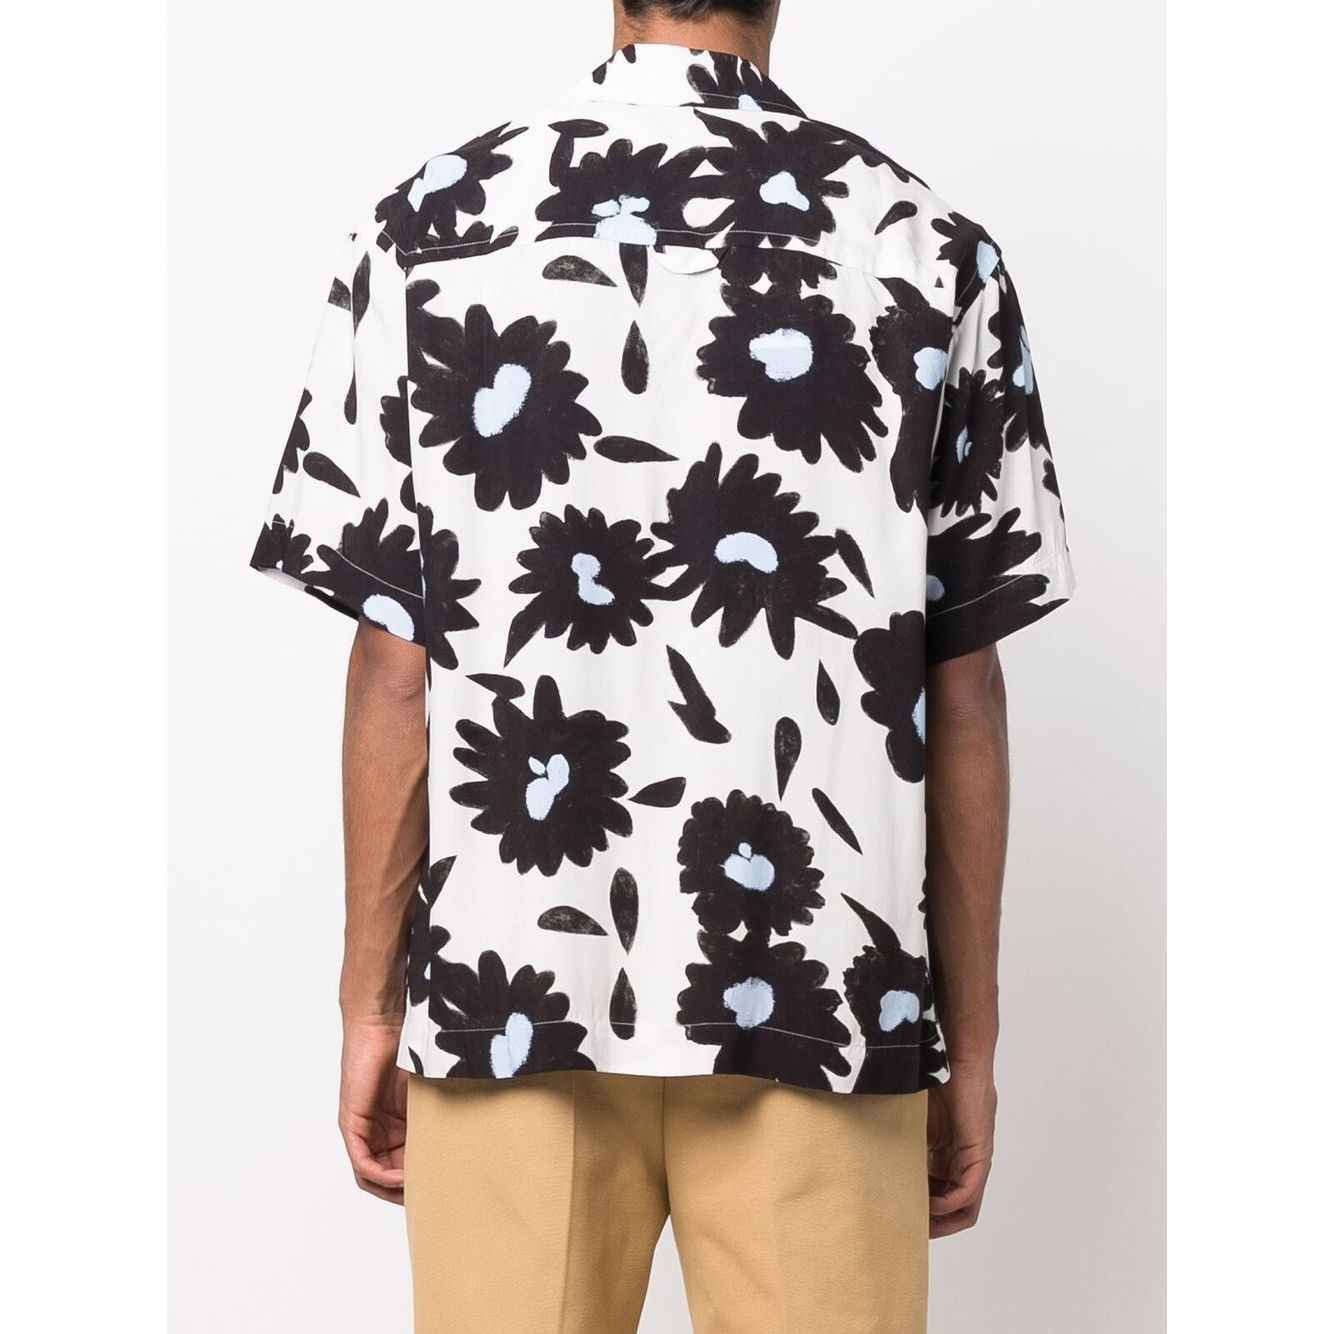 BTS Taehyung-Inspired Black And White Floral Short-Sleeve